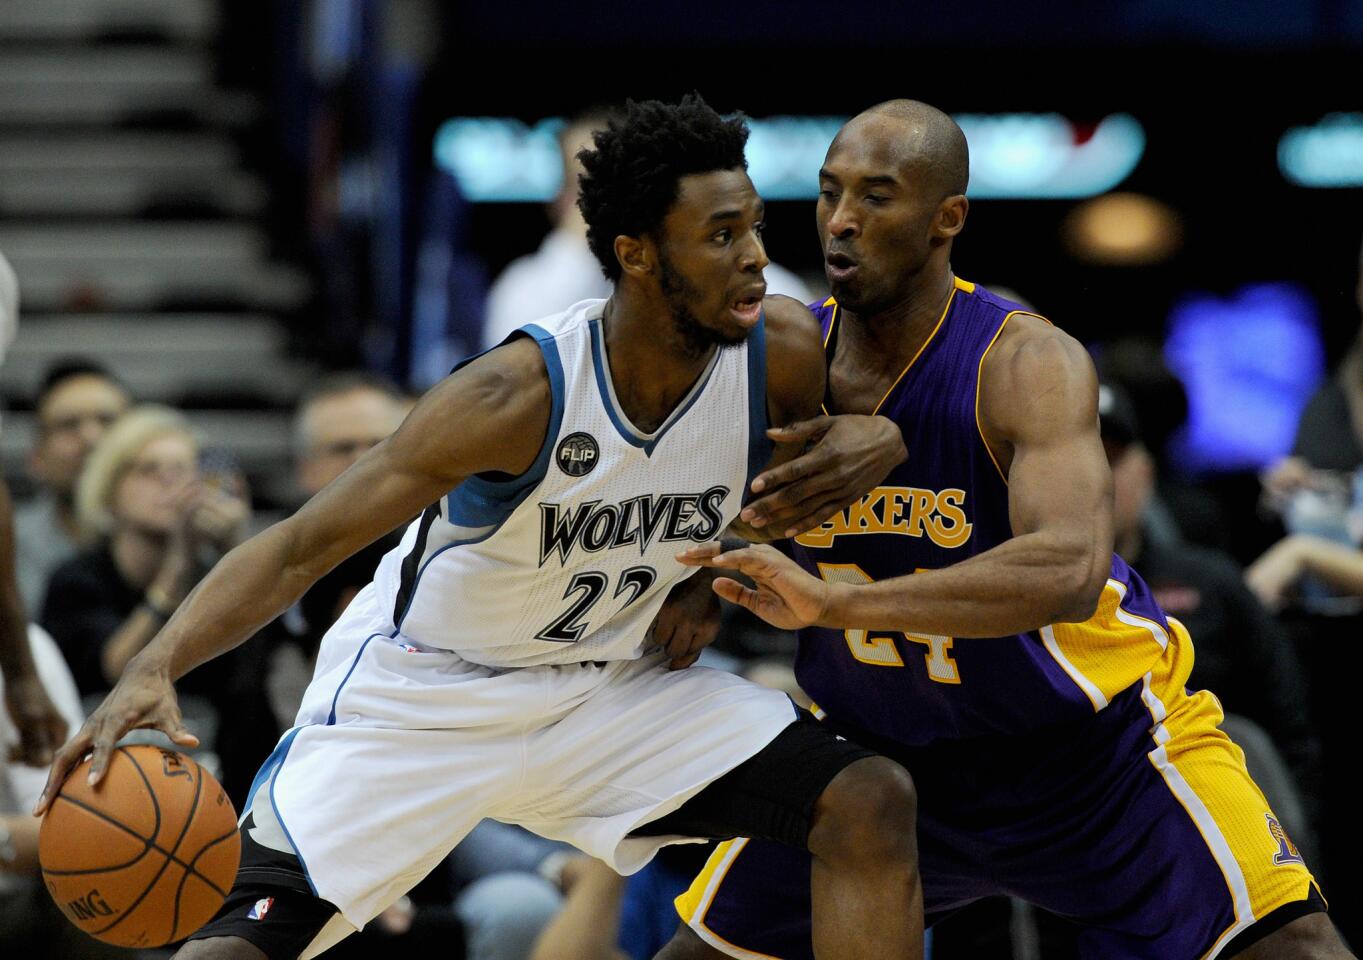 Lakers forward Kobe Bryant defends Timberwolves forward Andrew Wiggins during a game on Dec. 9.